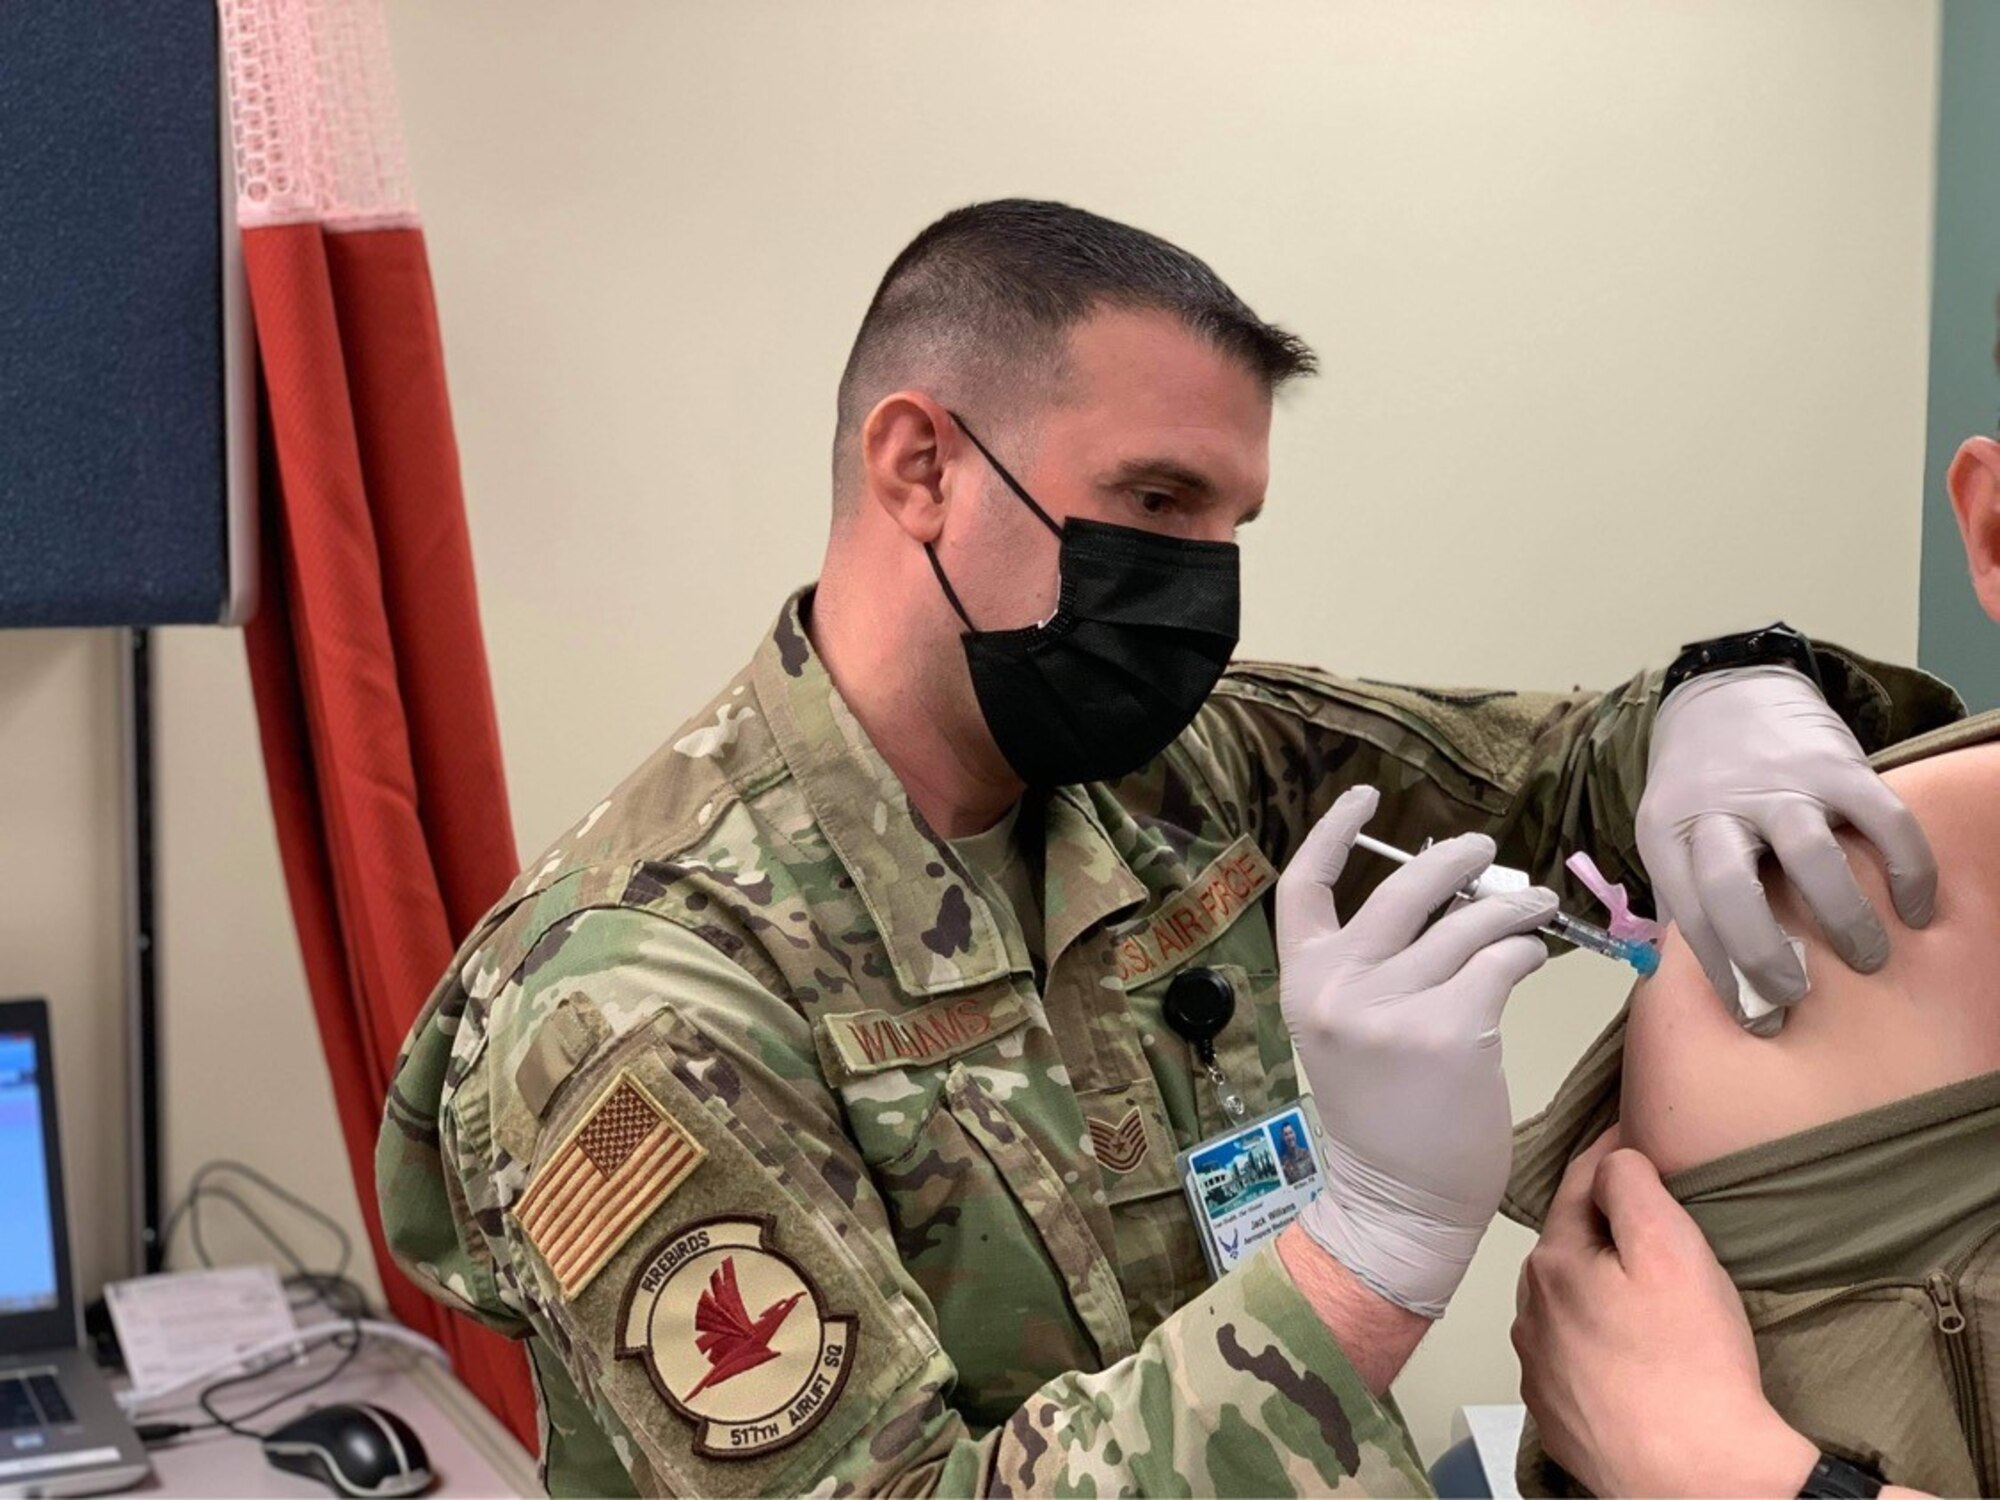 Air Force Tech. Sgt. Jack Williams, 517th Airlift Squadron independent duty medical technician, administers the COVID-19 vaccine, Dec. 30, 2020 at Joint Base Elmendorf-Richardson, Alaska. IDMTs role is to communicate issues affecting the combat readiness, mission effectiveness, and individual medical readiness directly to the commander while advising them on recommendations to perform safe, effective flying operations.